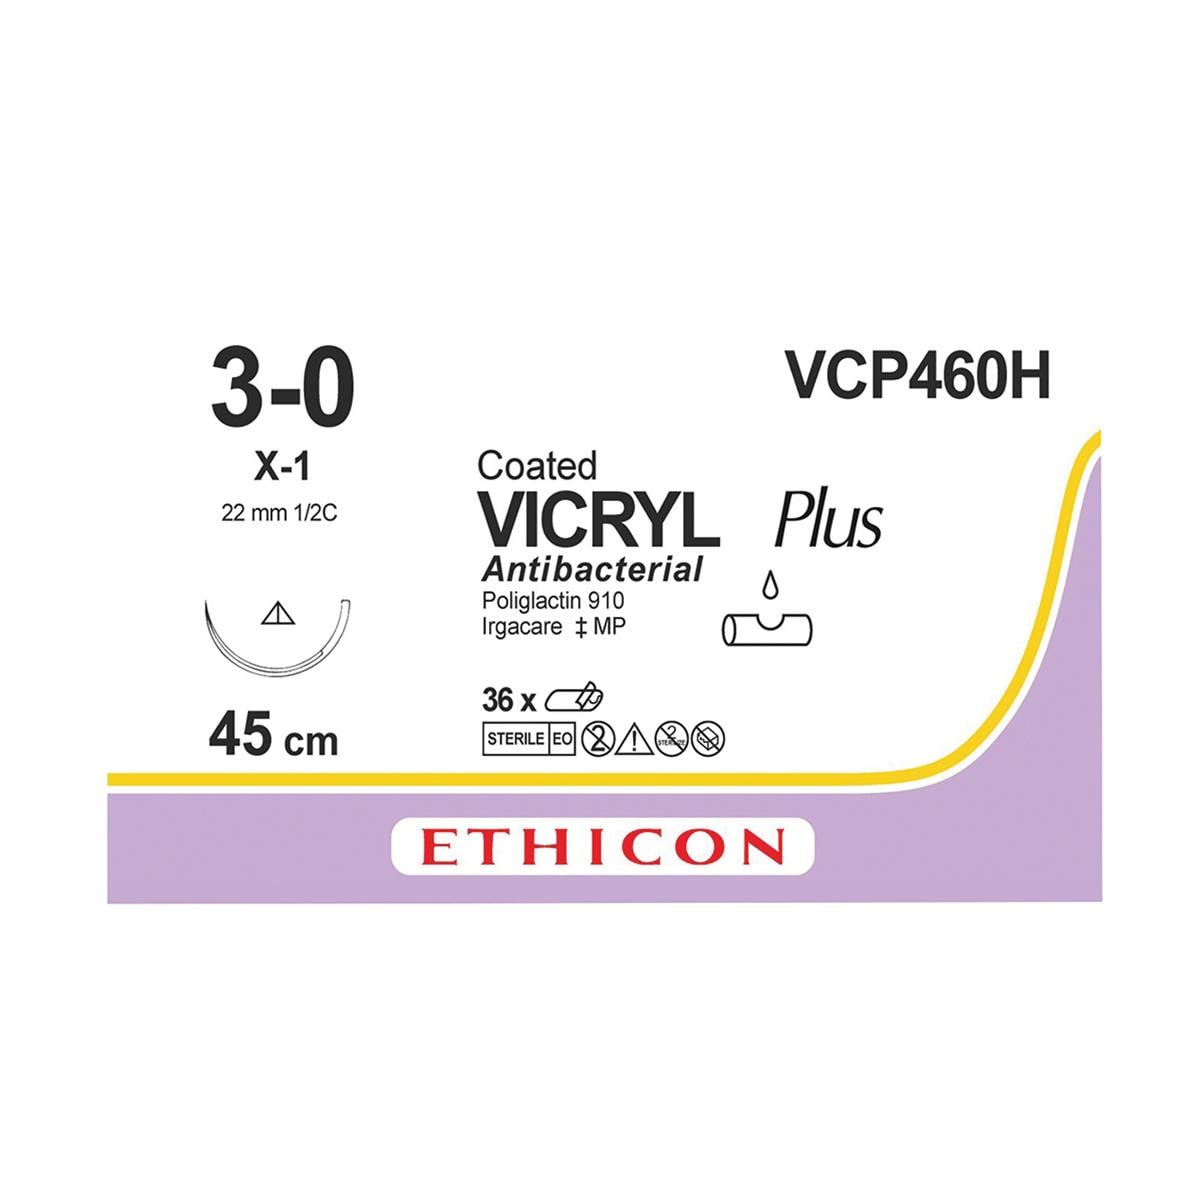 VICRYL Plus Sutures Violet Coated 45cm 3-0 1/2 Circle Conventional Cutting X-1 22mm VCP460H 36pk